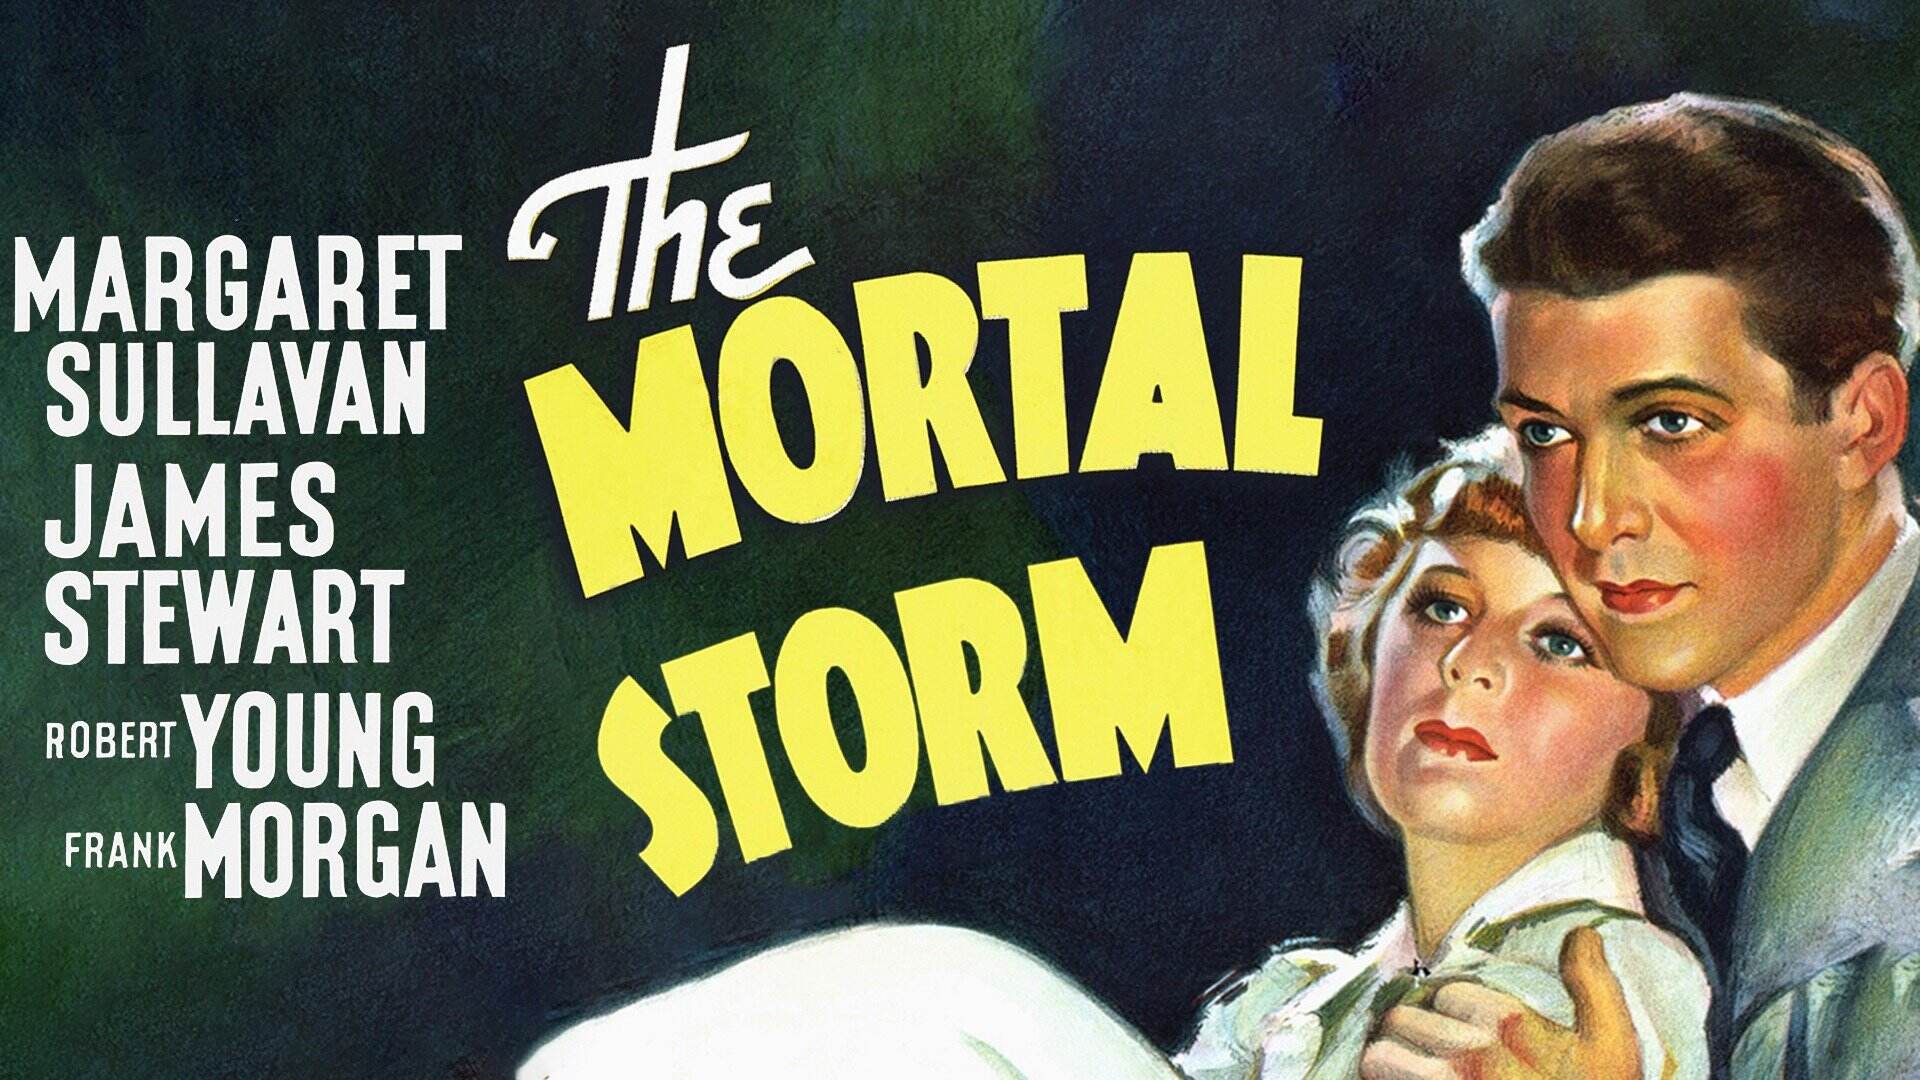 33-facts-about-the-movie-the-mortal-storm